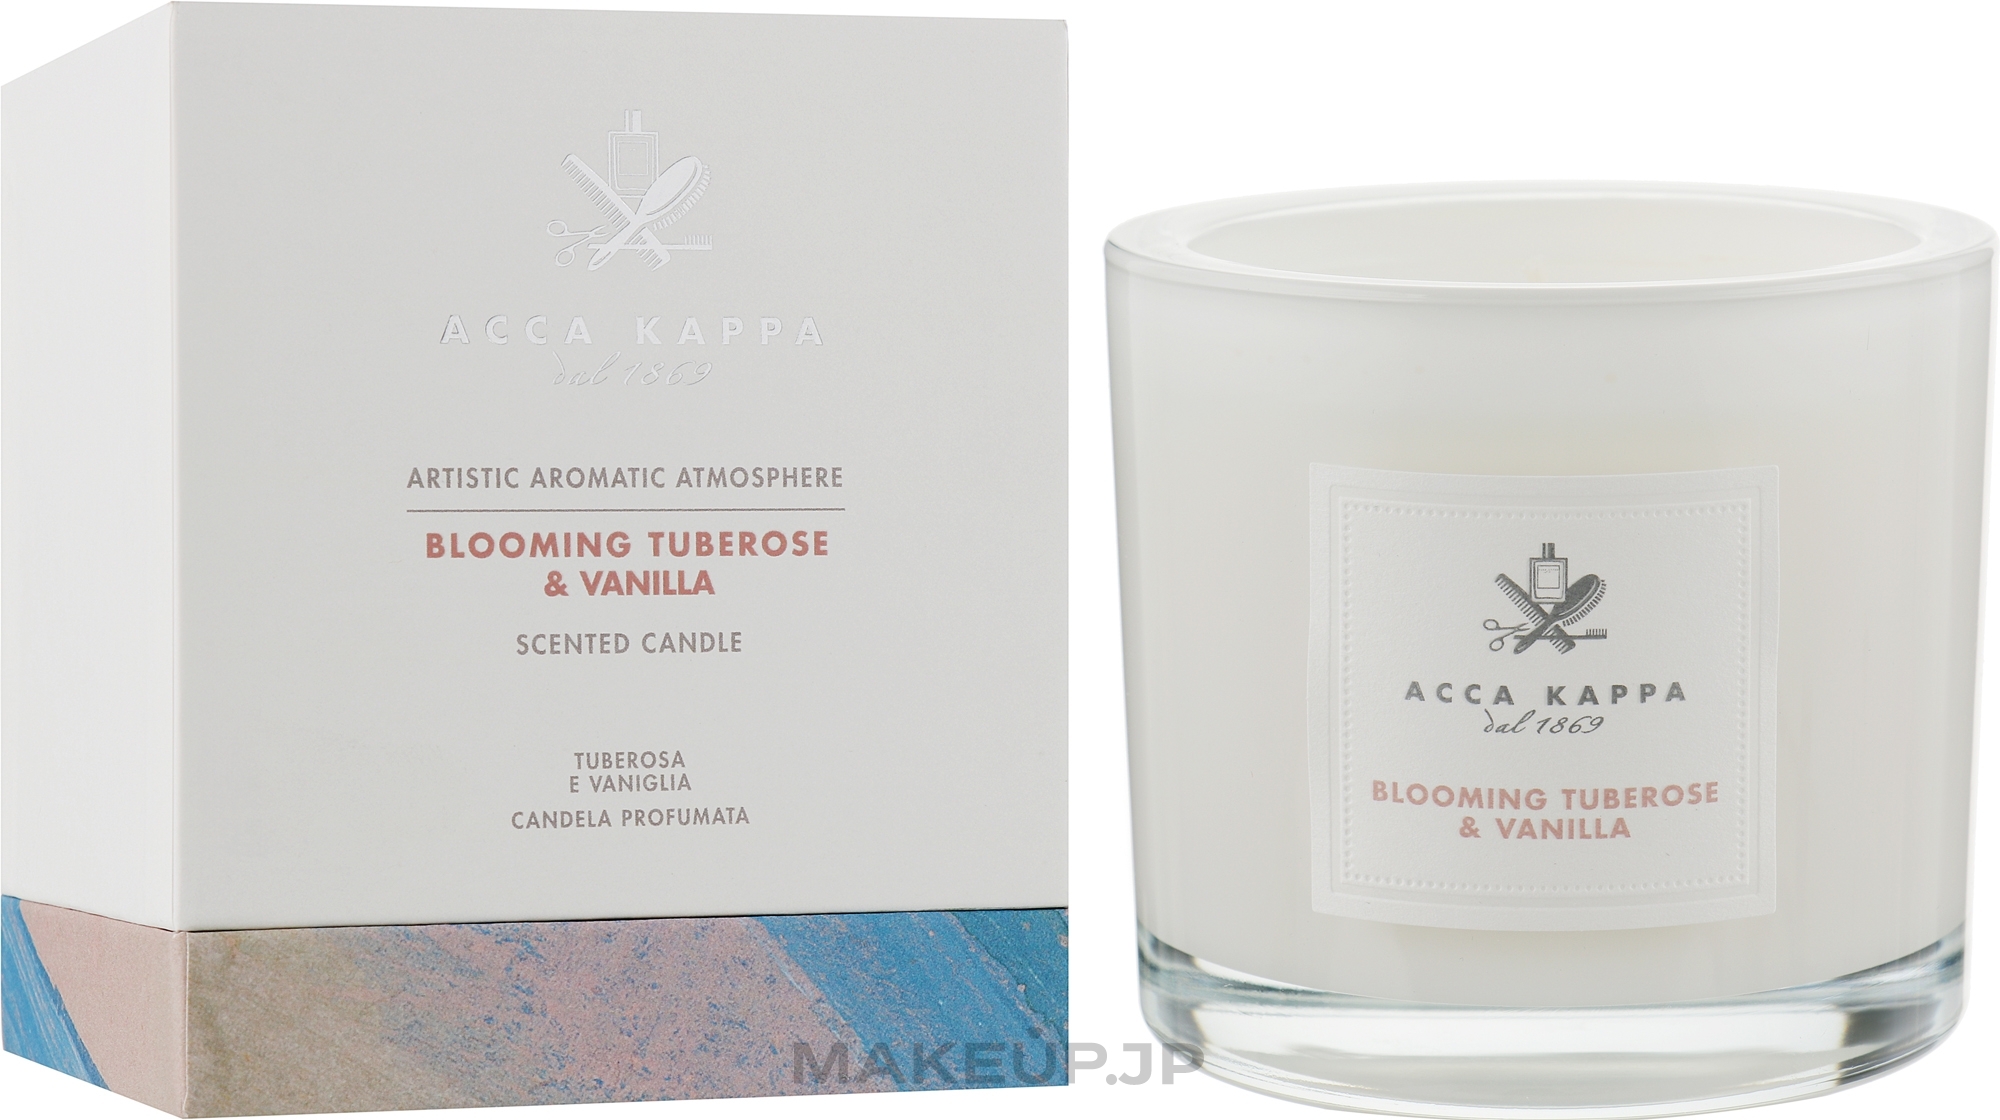 Tuberose & Vanilla Scented Candle - Acca Kappa Scented Candle — photo 180 g